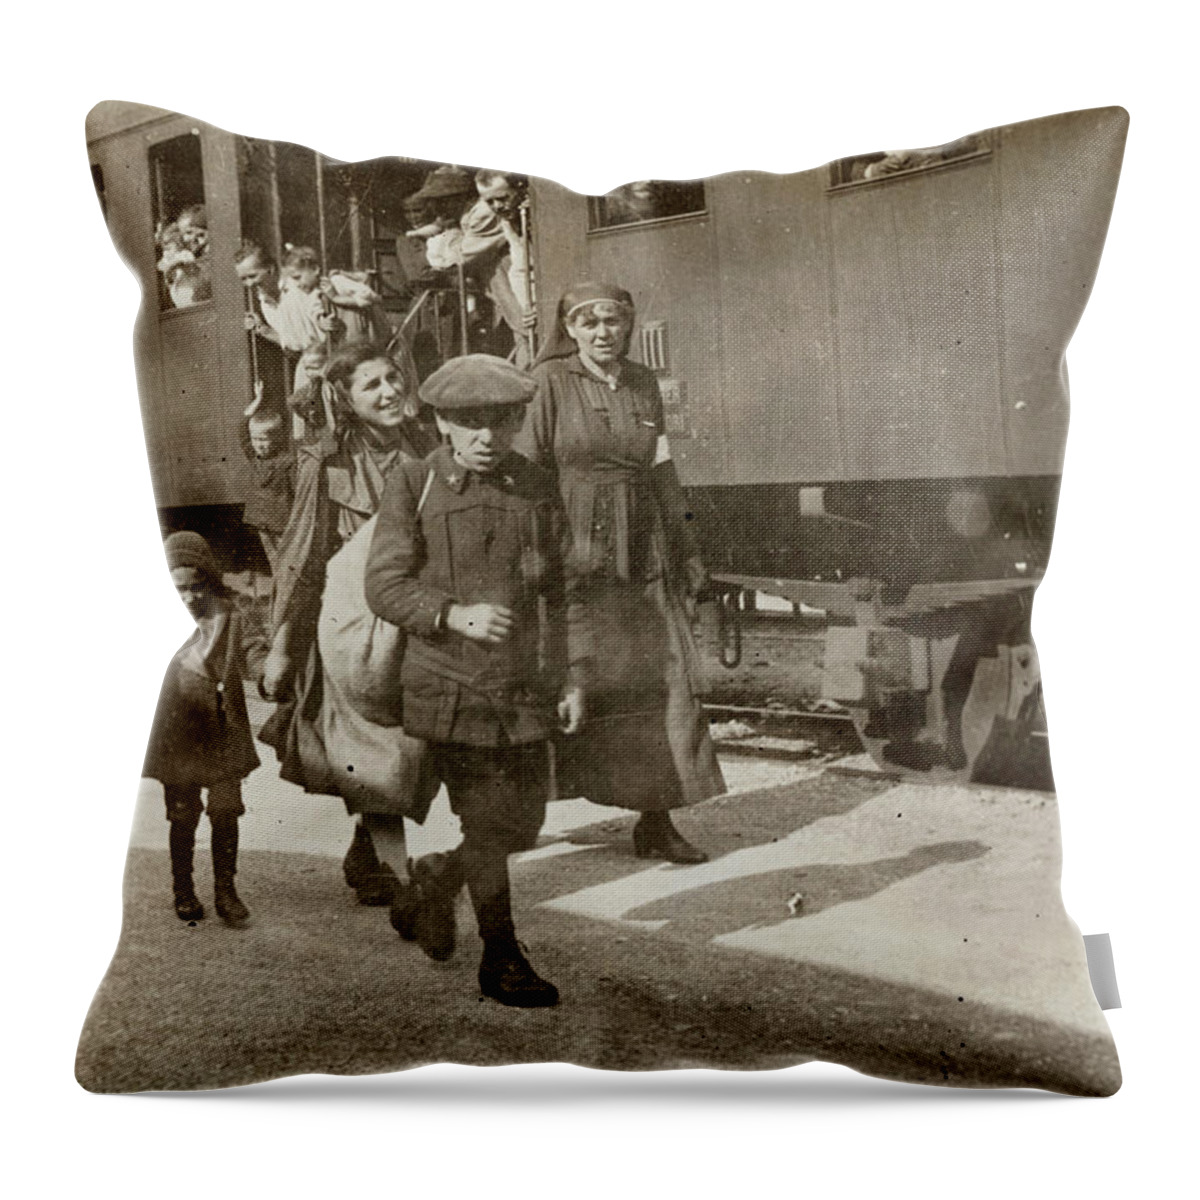 1919 Throw Pillow featuring the photograph Wwi Refugees, 1919 #17 by Granger